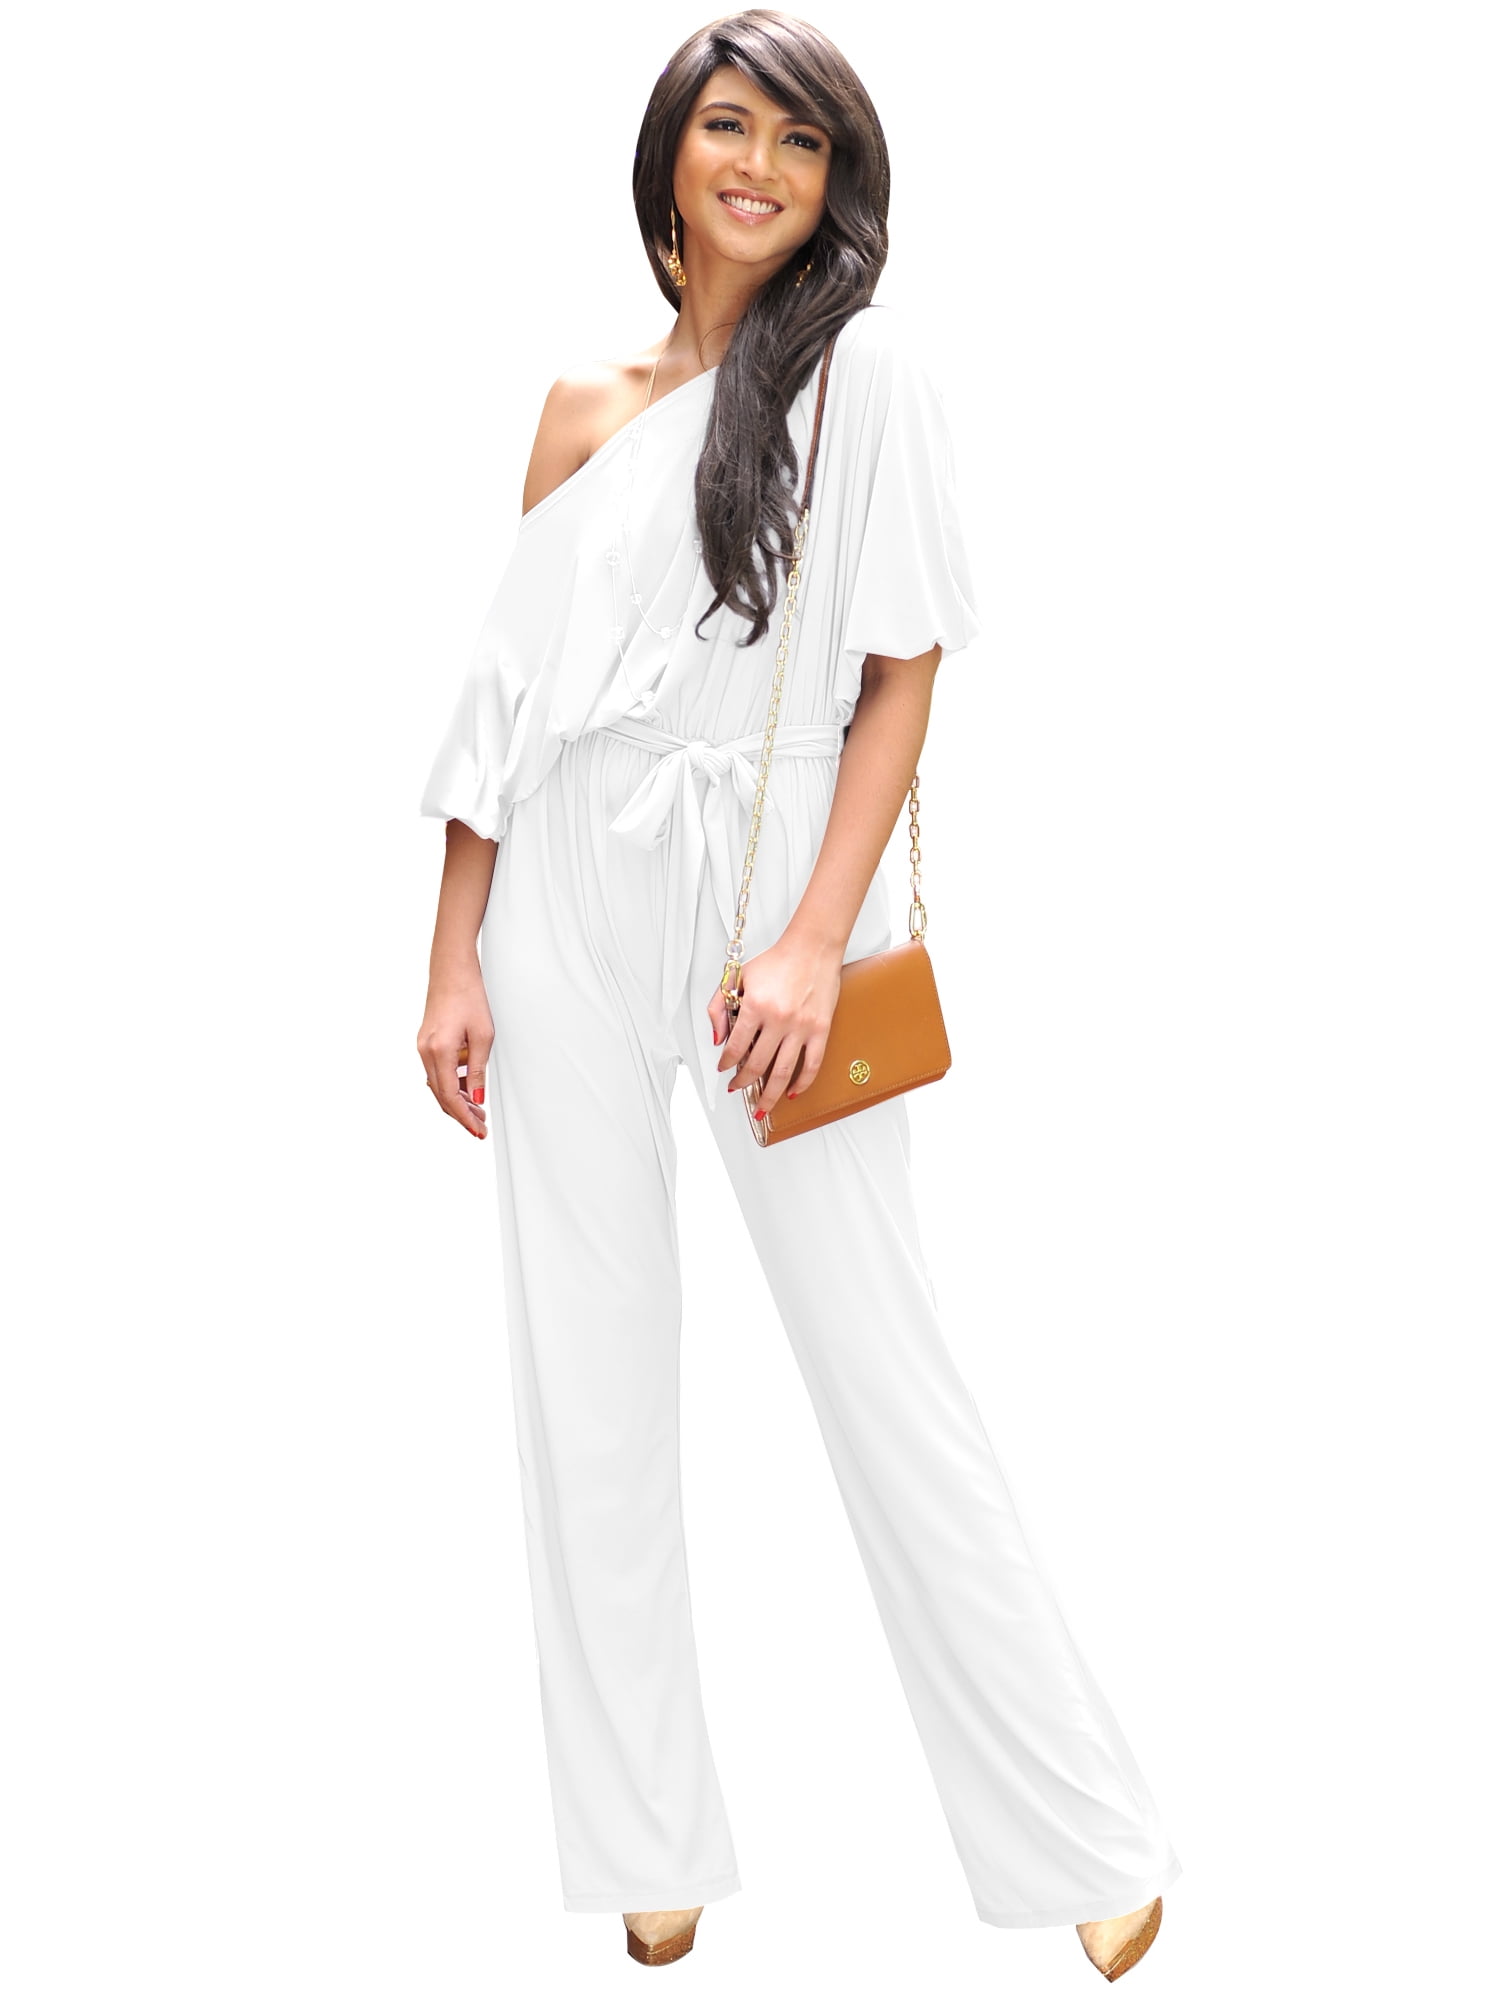 take a picture As Nerve KOH KOH Long Pant One Off Shoulder 3/4 Short Sleeve Sexy Wide Leg Casual  Summer Fall One Piece Jumpsuit Pant Suit Romper Playsuit Tall Overall For  Women Ivory White XXXX-Large US 26-28